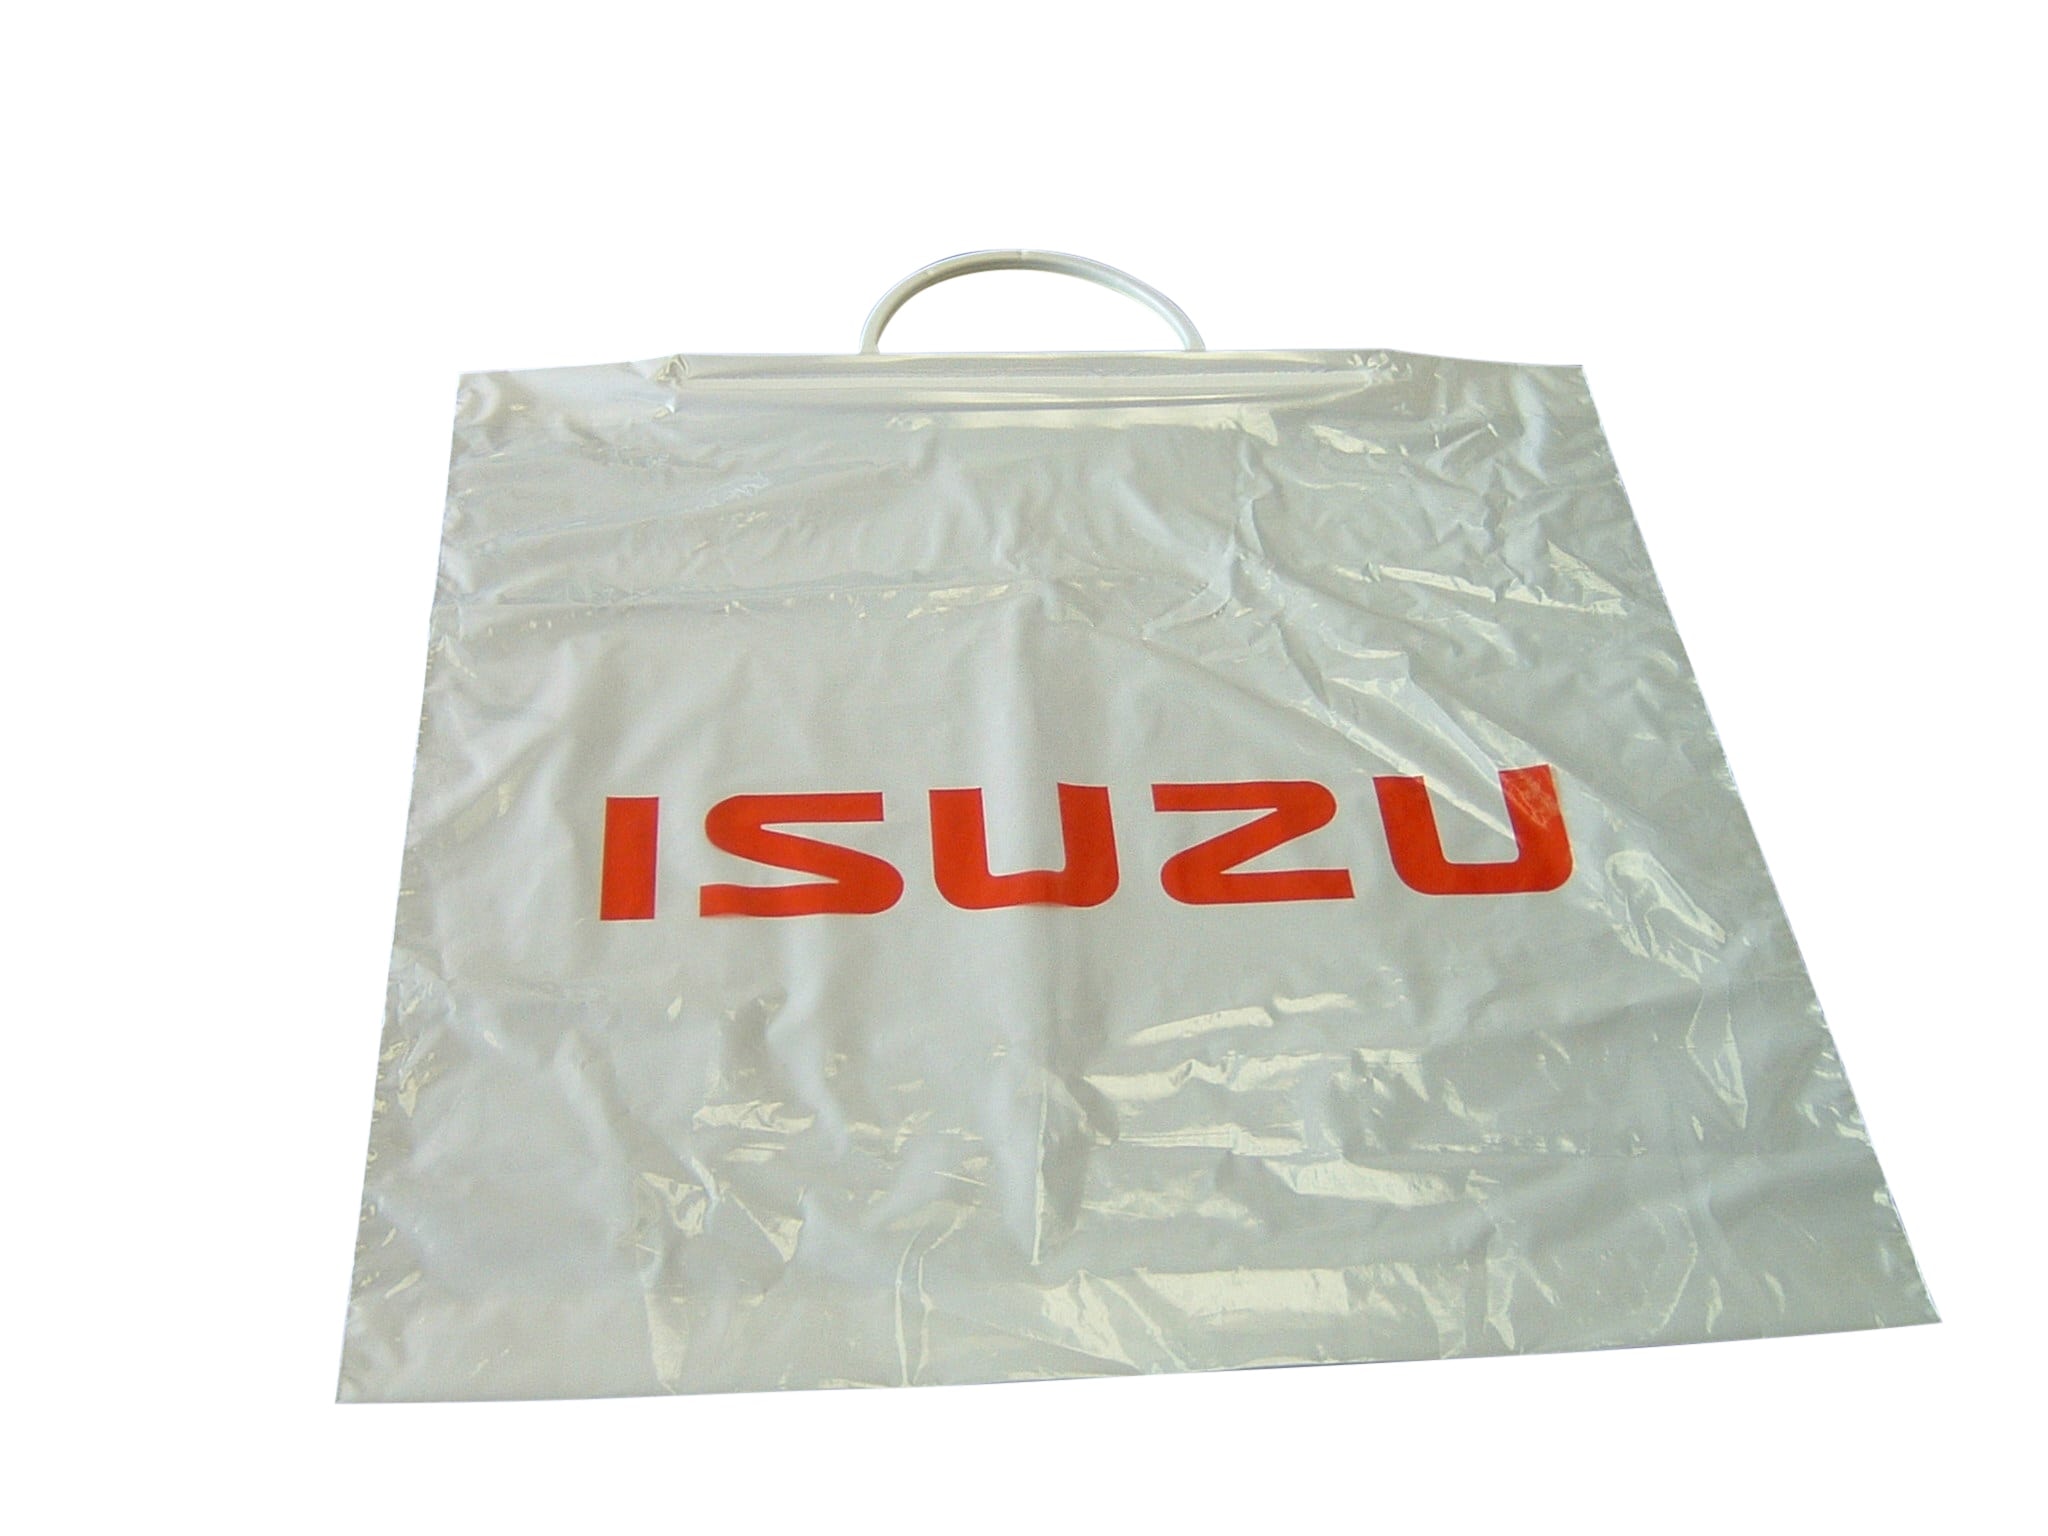 Promotional Trade Show Bags - Promotional Bags for Expos